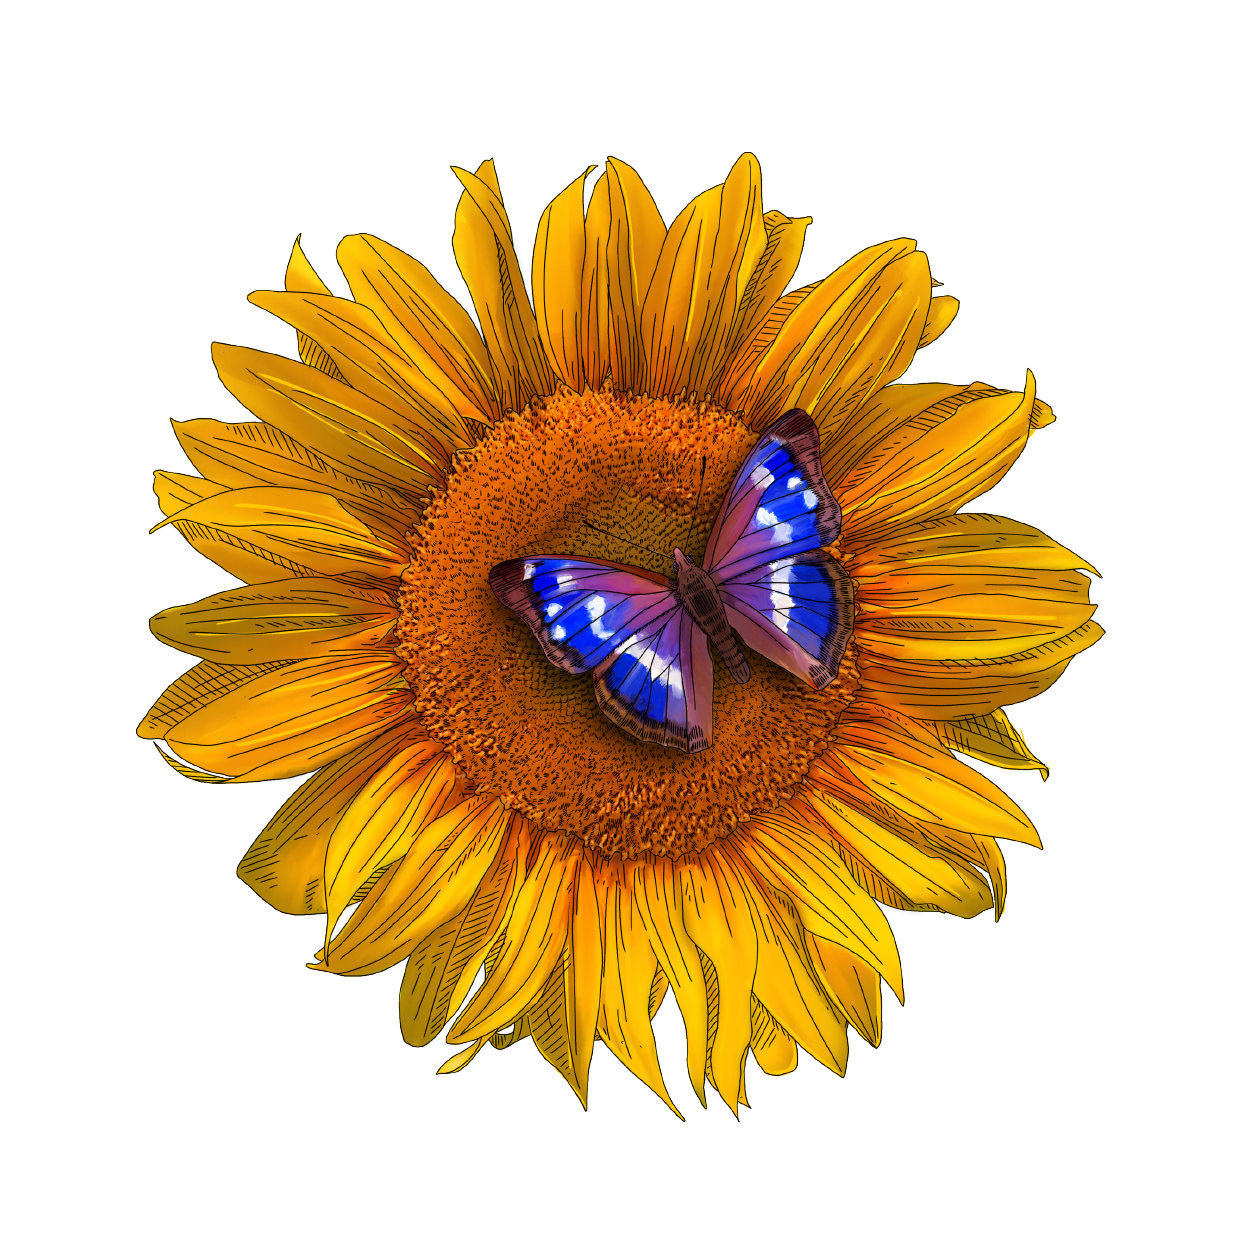 yellow sunflower with purple butterfly landed on it